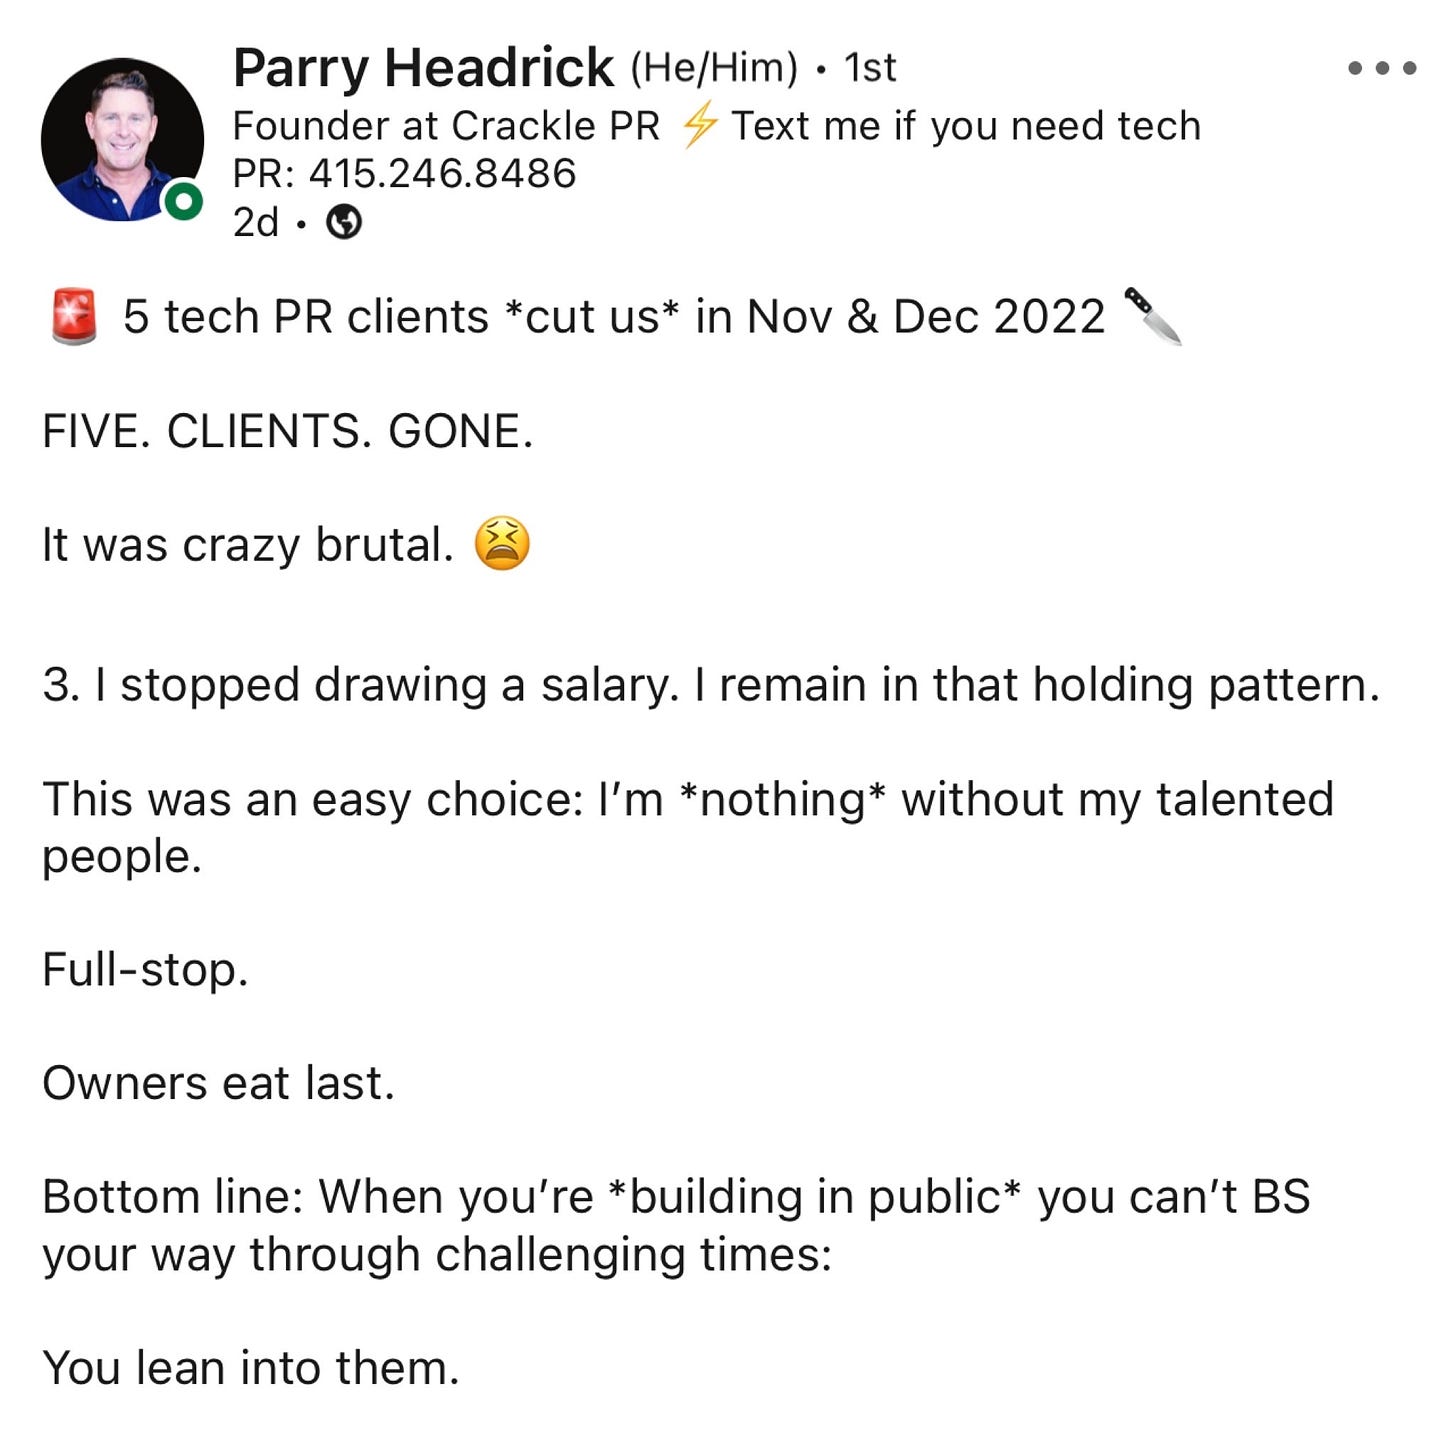 Text: 5 tech PR clients *cut us* in Nov & Dec 2022   FIVE. CLIENTS. GONE.  It was crazy brutal.   I stopped drawing a salary. I remain in that holding pattern.  This was an easy choice: I’m *nothing* without my talented people.  Full-stop.  Owners eat last.  Bottom line: When you’re *building in public* you can’t BS your way through challenging times:  You lean into them.